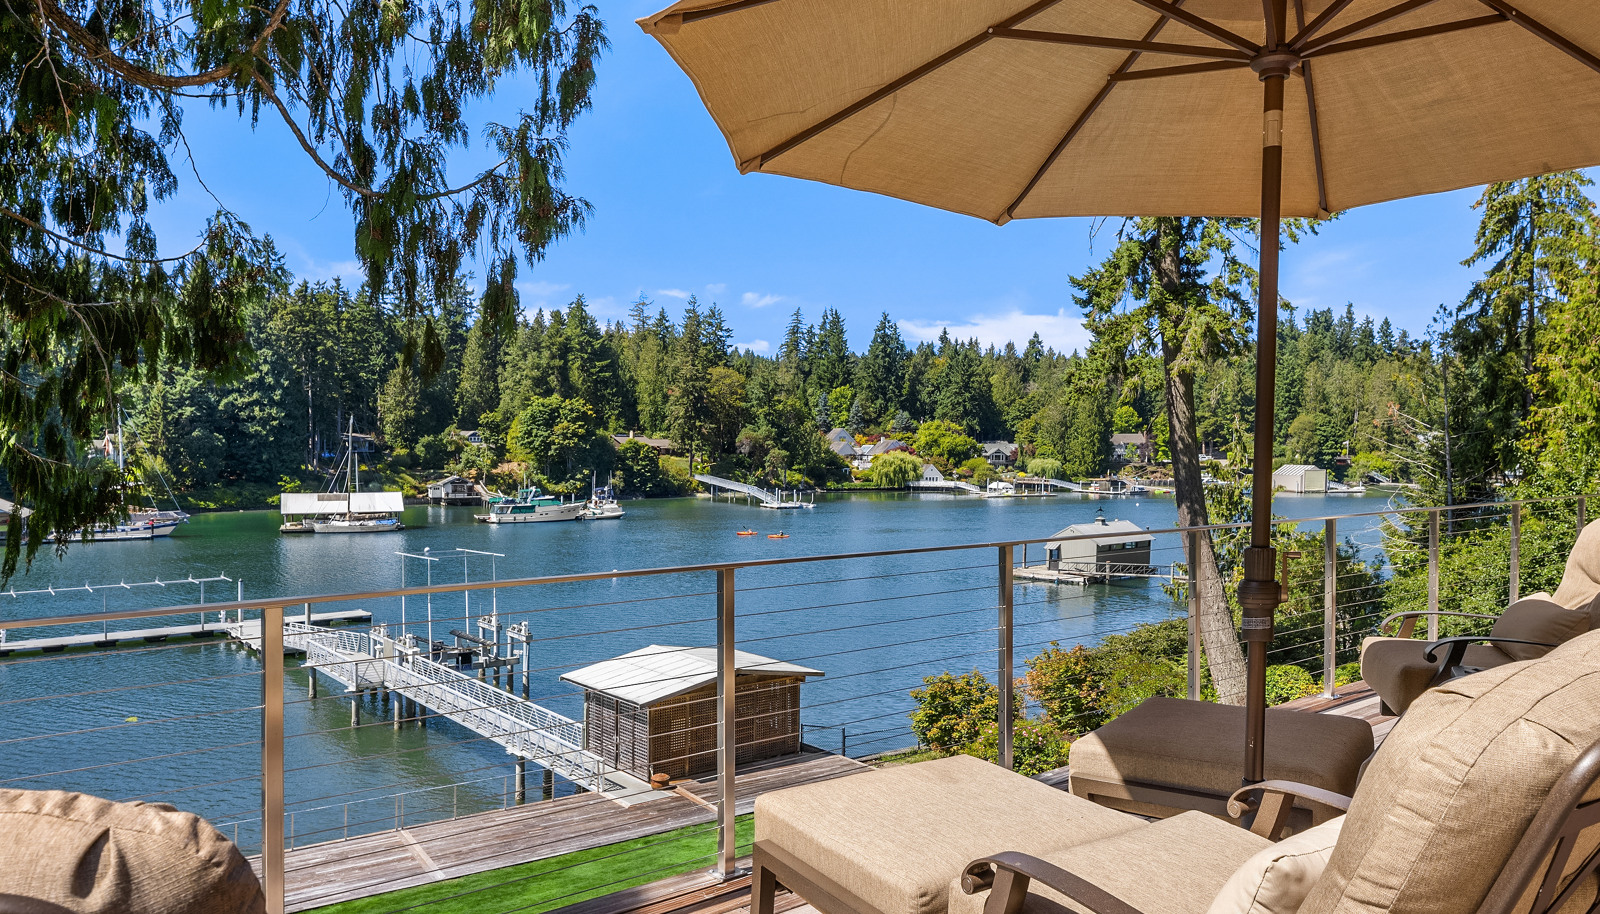 Quality, imaginative, floating Ipe decks, a propane fire-pit, and direct access to the expansive lawn, gardens, shoreside deck and dock. 